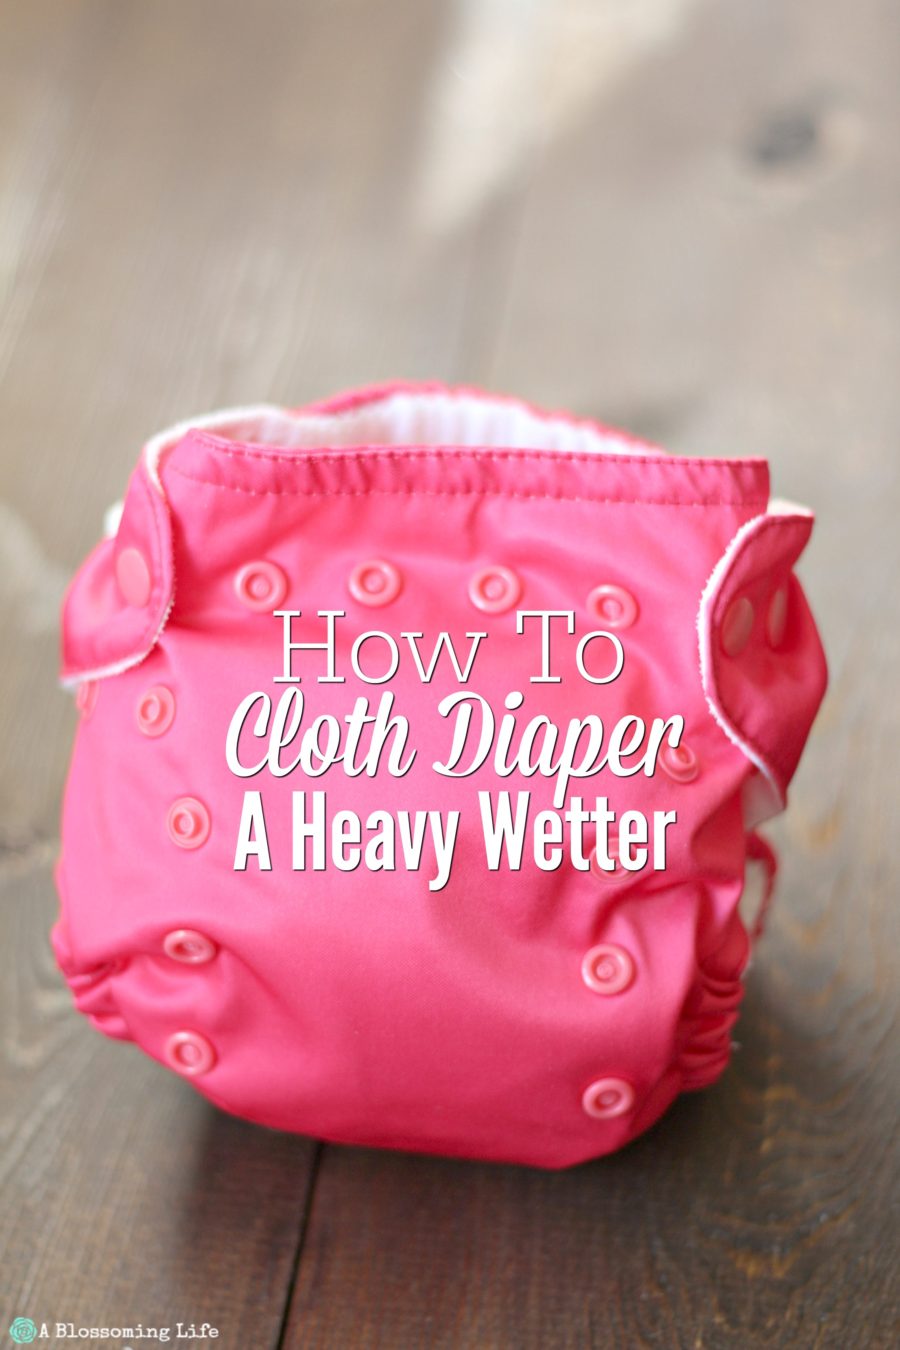 How To Cloth Diaper A Heavy Wetter